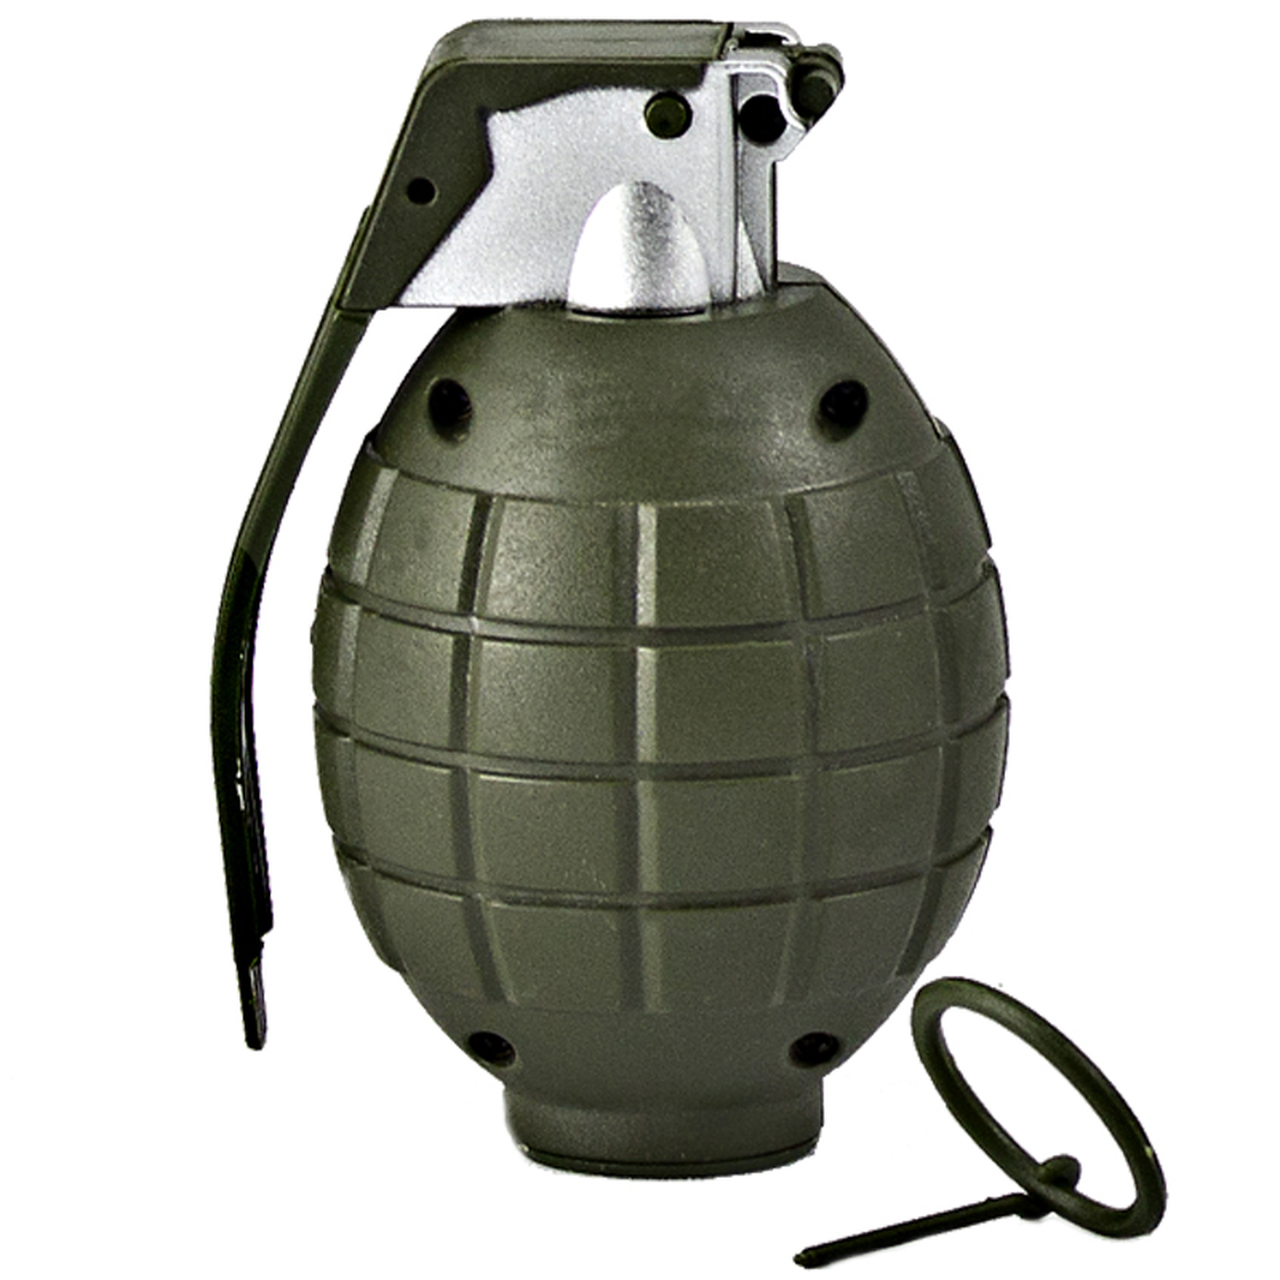 Grenade found and defused in Itahari